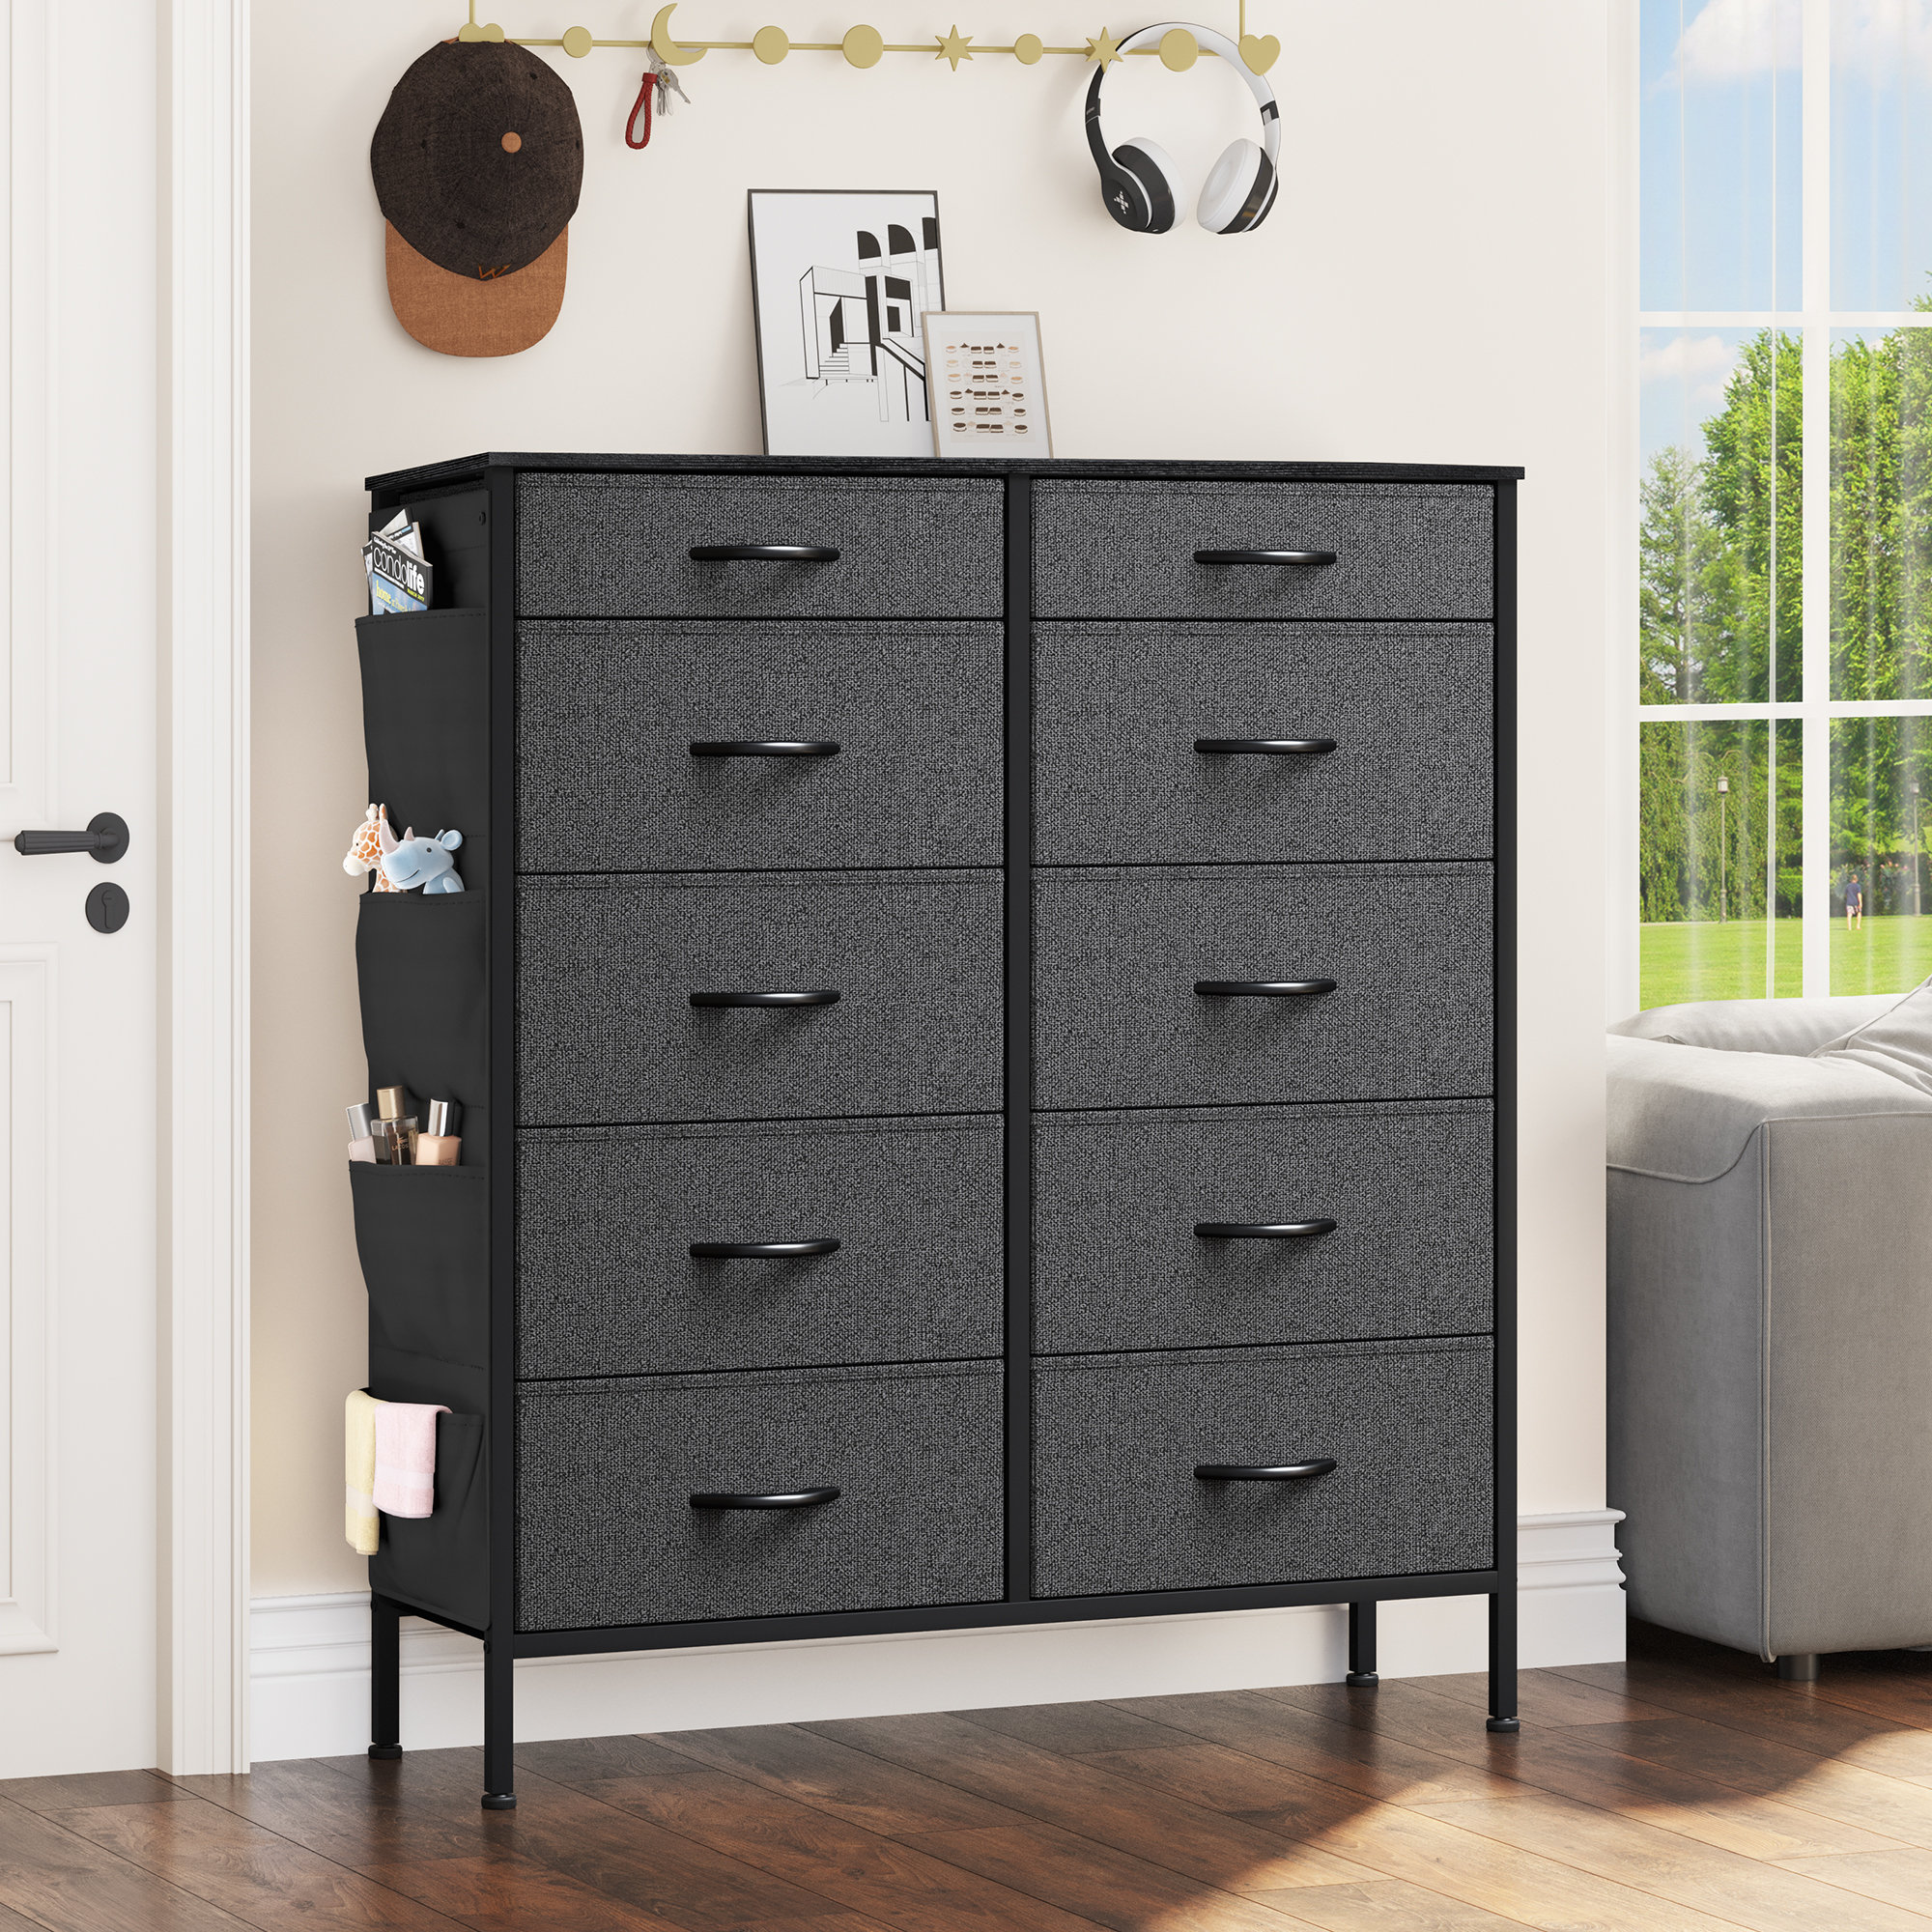 YITAHOME Dresser with 4 Drawers - Storage Tower Unit, Fabric Dresser for Bedroom, Living Room, Closets & Nursery - Sturdy Steel Frame, Wooden Top 